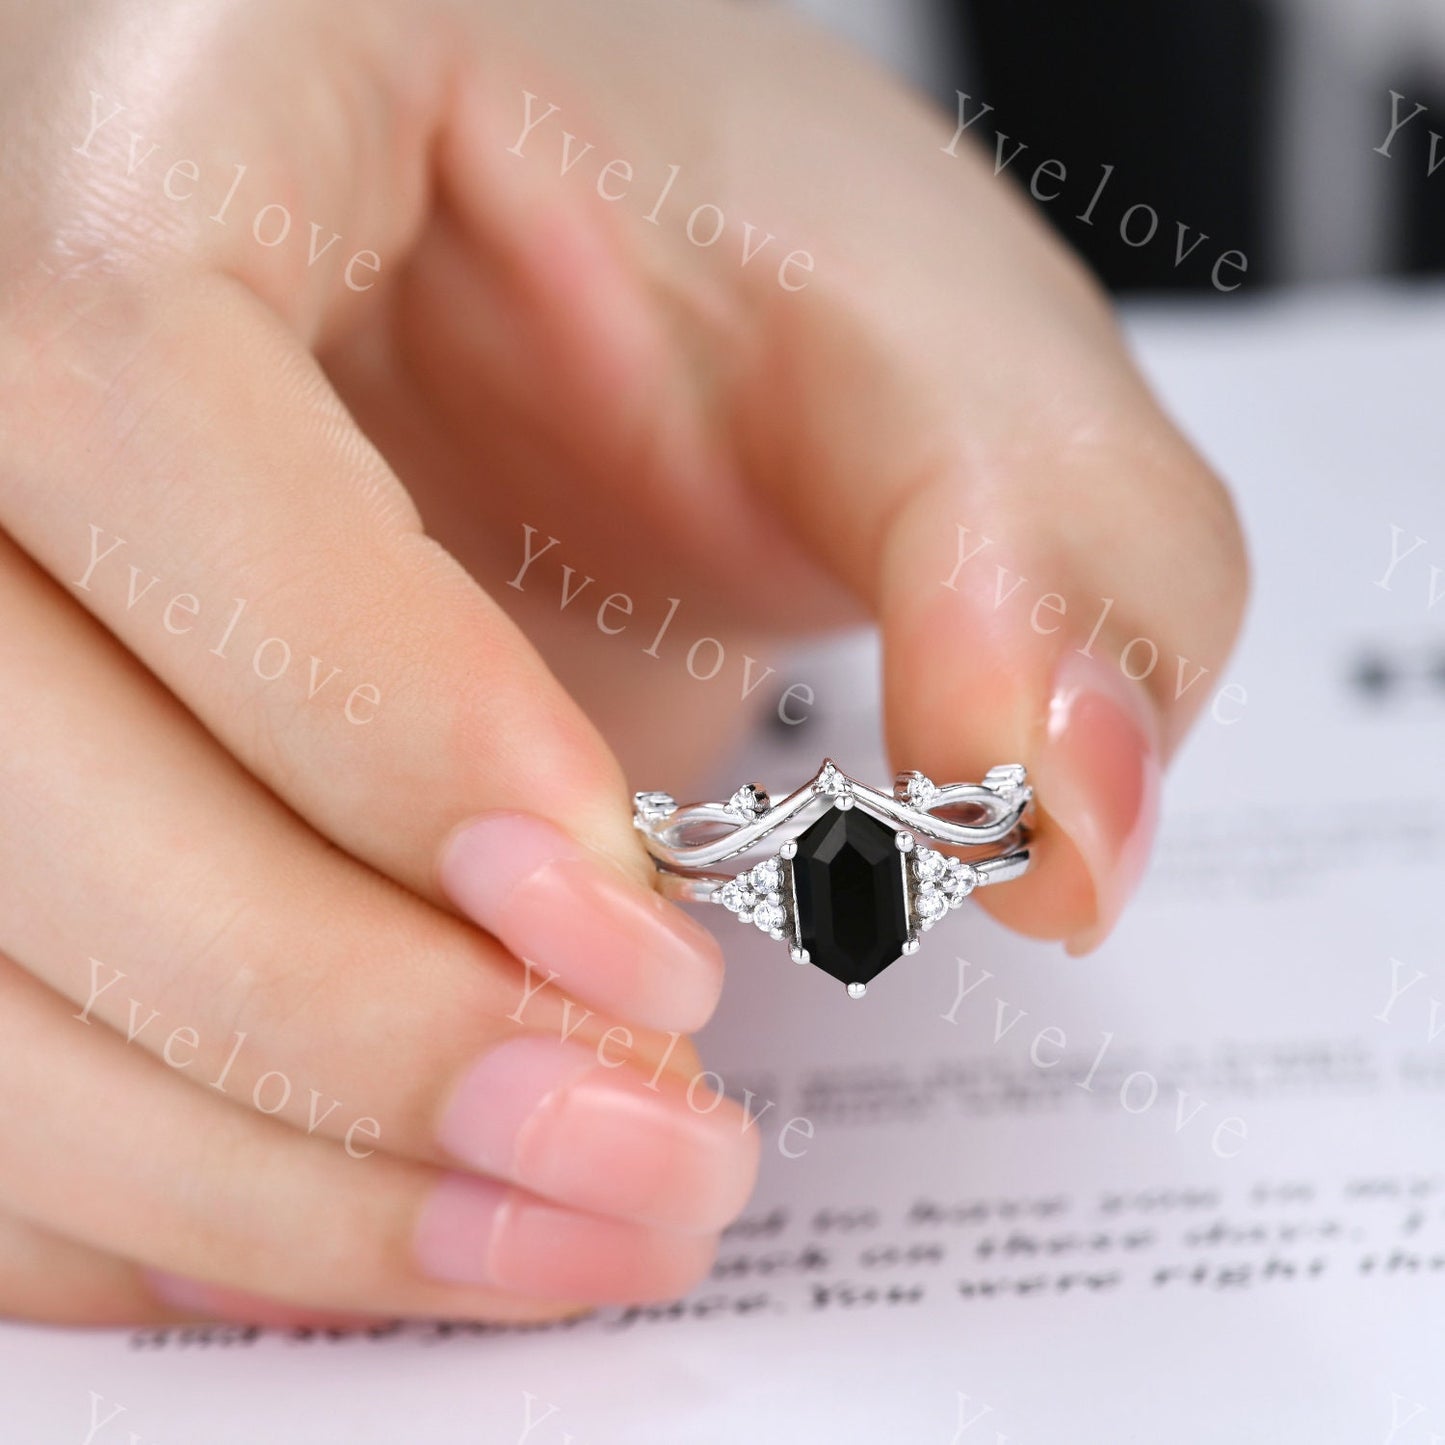 Retro hexagon Black Onyx Ring,Vintage Sterling Silver Ring Set,Unique Black Onyx Engagement Ring,Promise Ring,Anniversary Ring Gift For Her